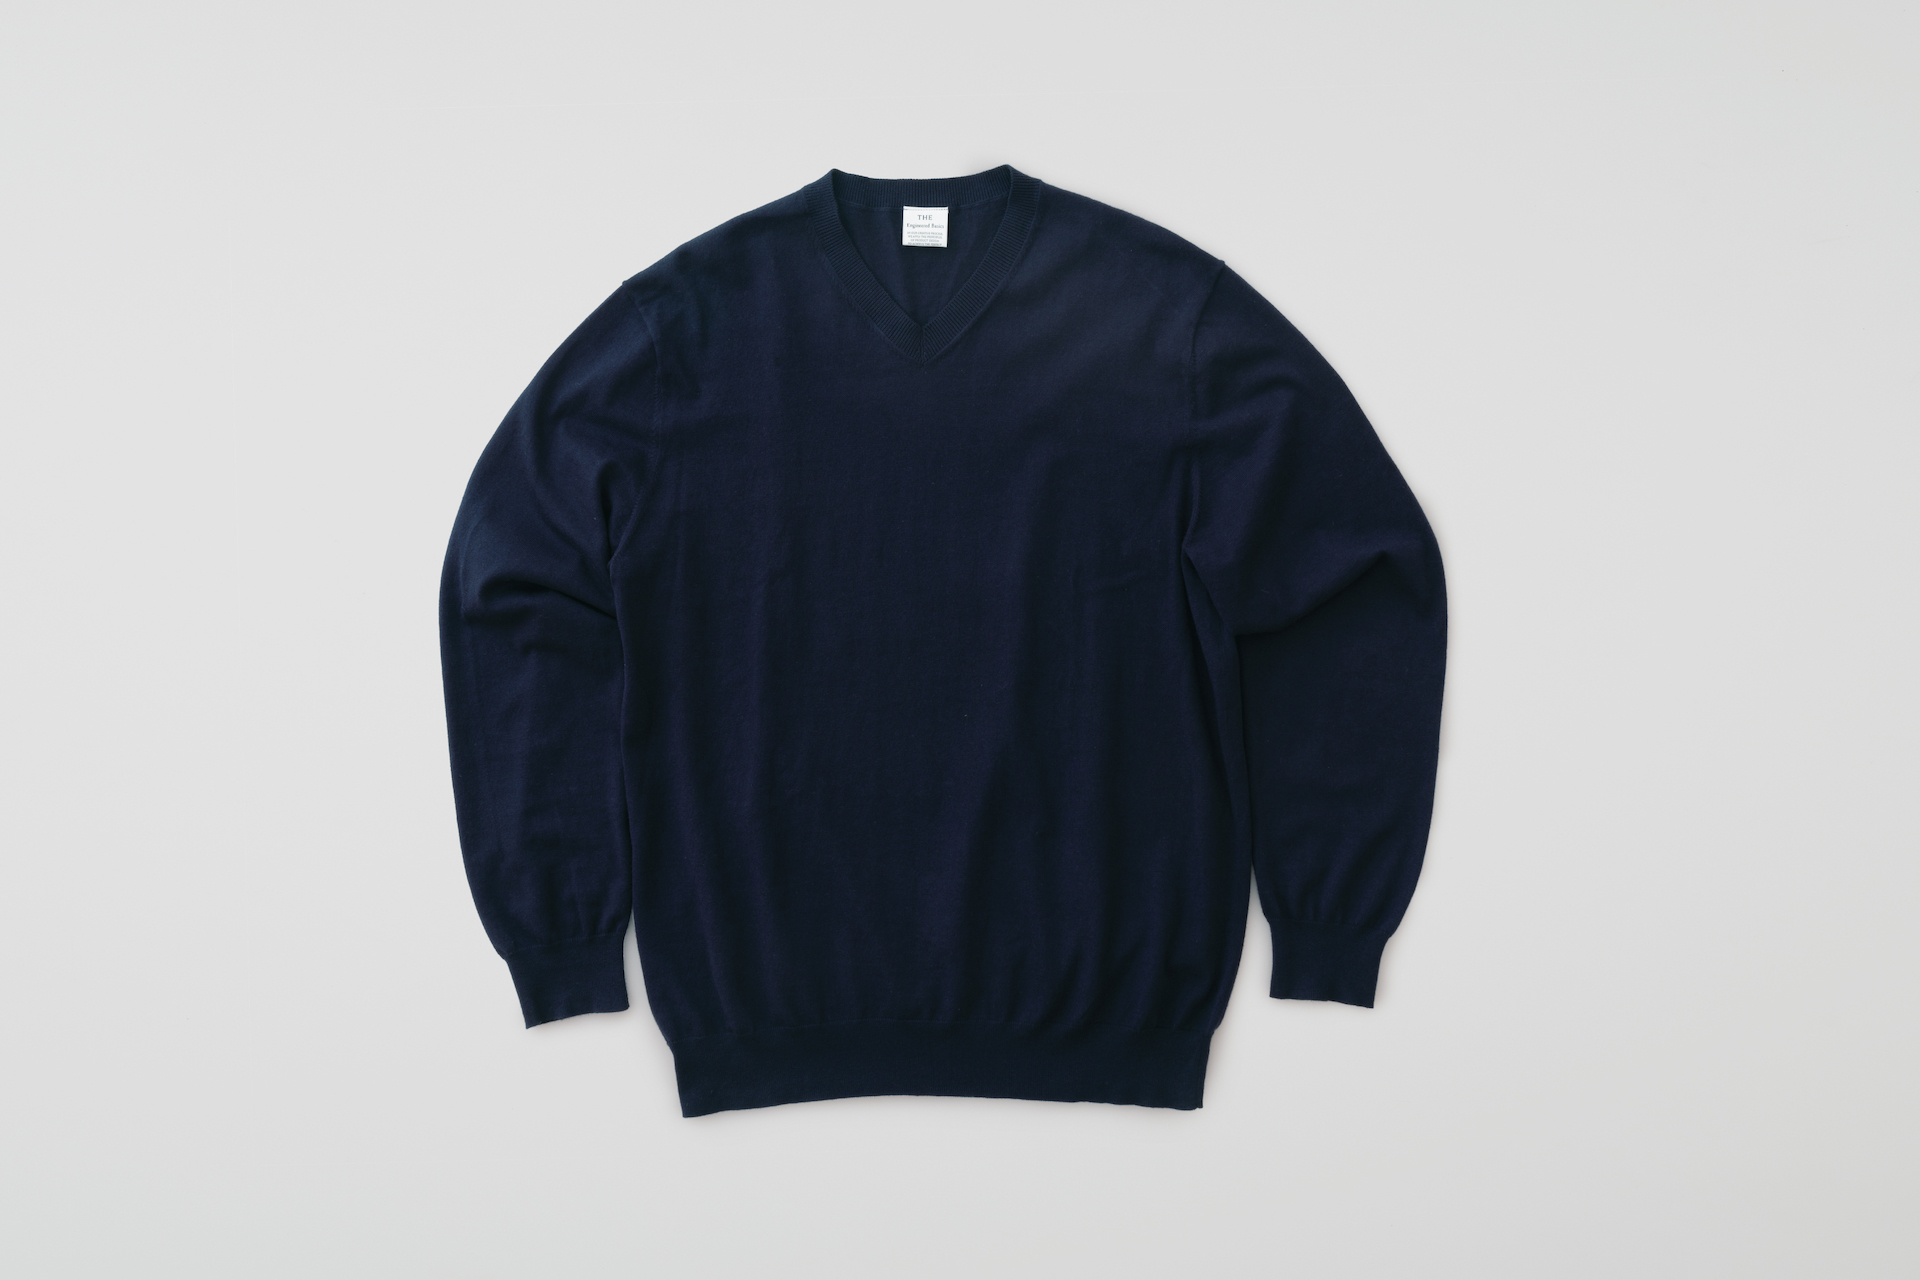 THE Sweater Crew neck / THE Sweater V-neck